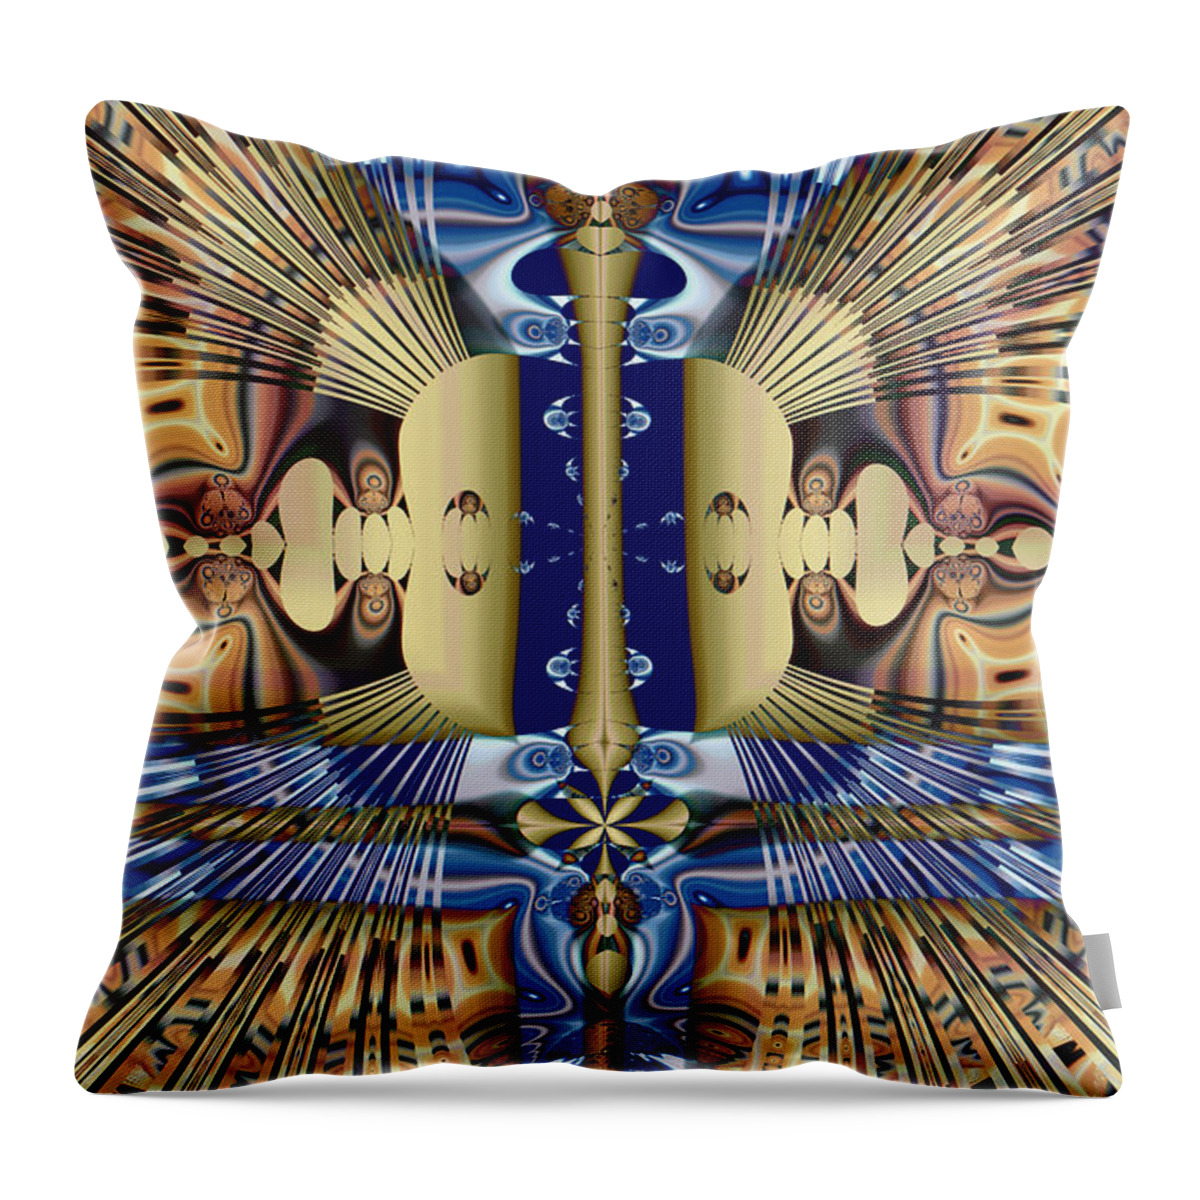 Abstract Throw Pillow featuring the digital art Winged Anubis by Jim Pavelle